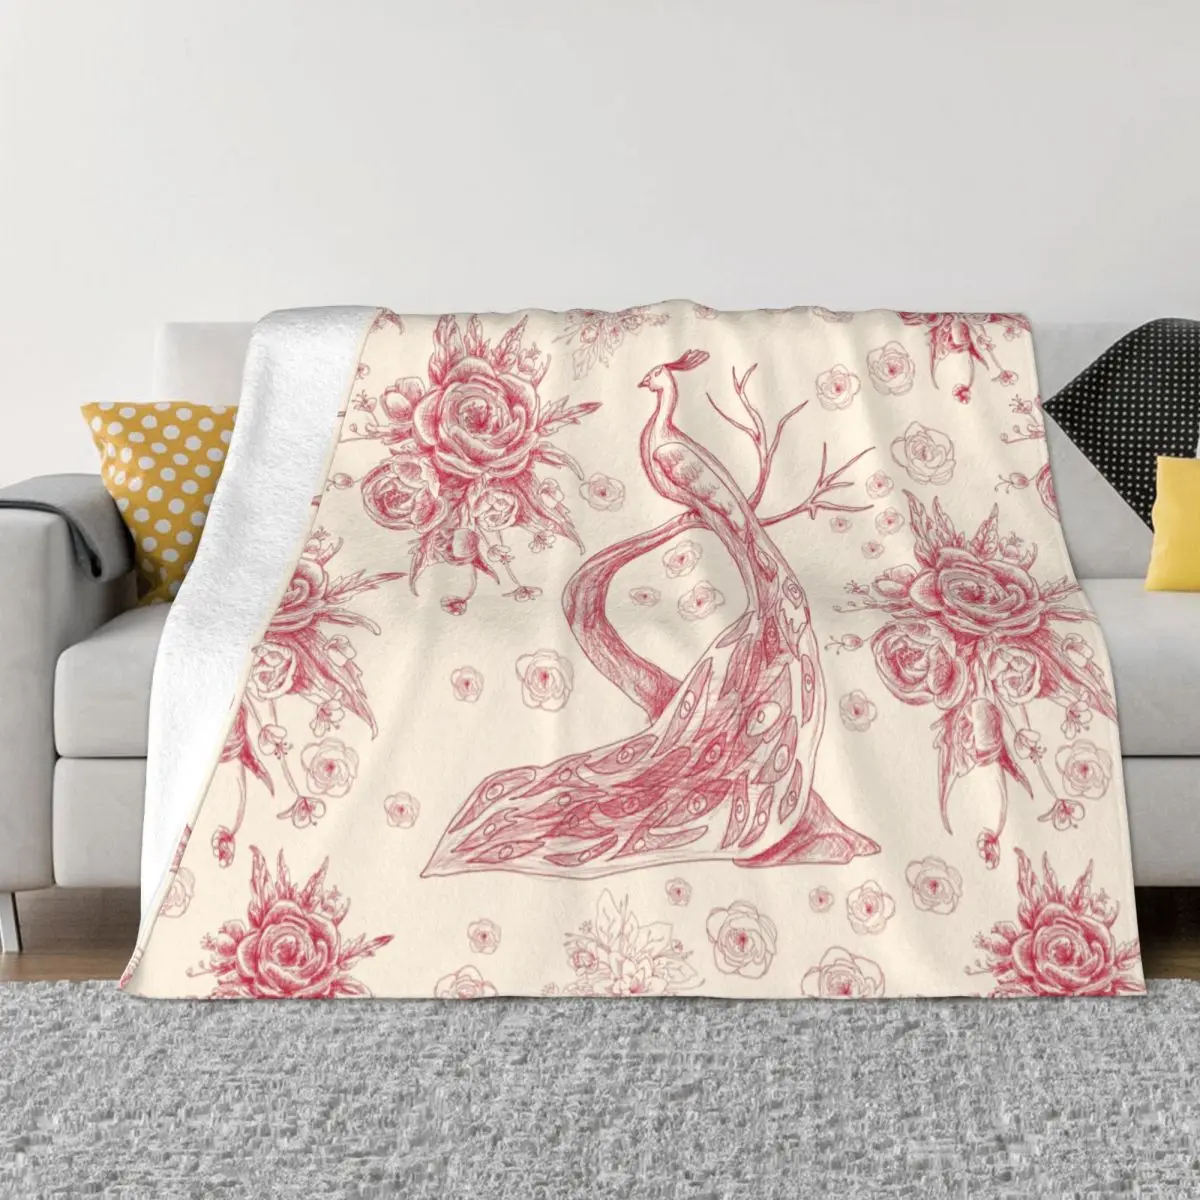 

Toile De Jouy Rose Blanket 3D Printed Soft Flannel Fleece Warm French Motif Flora Throw Blankets for Office Bed Couch Quilt